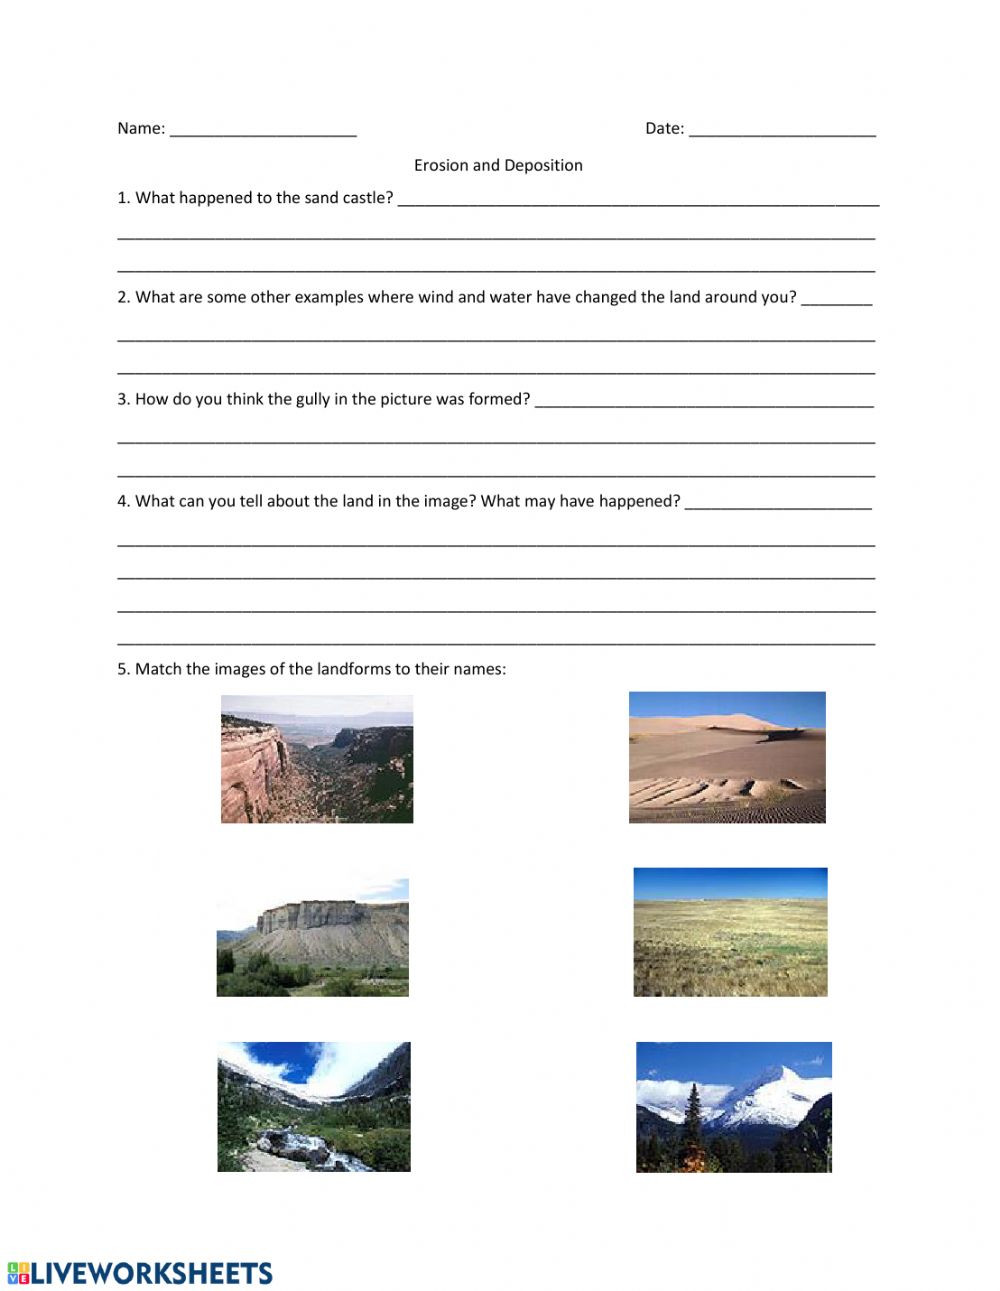 Weathering Erosion and Deposition Worksheet Erosion and Deposition Short Answers Interactive Worksheet